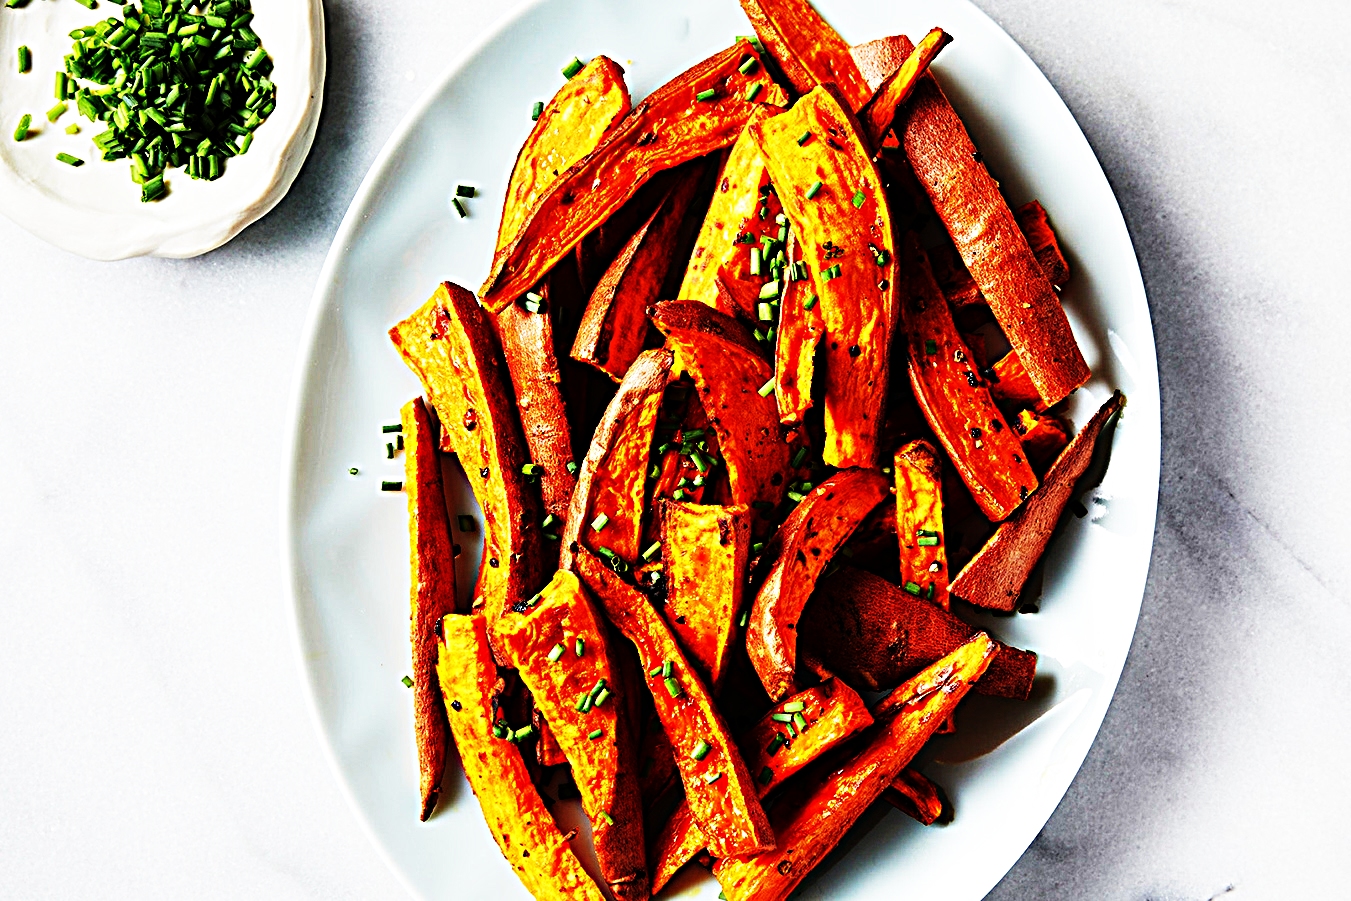 Stupid-Easy Recipe for Easy Baked Sweet Potato Fries  (#1 Top-Rated)